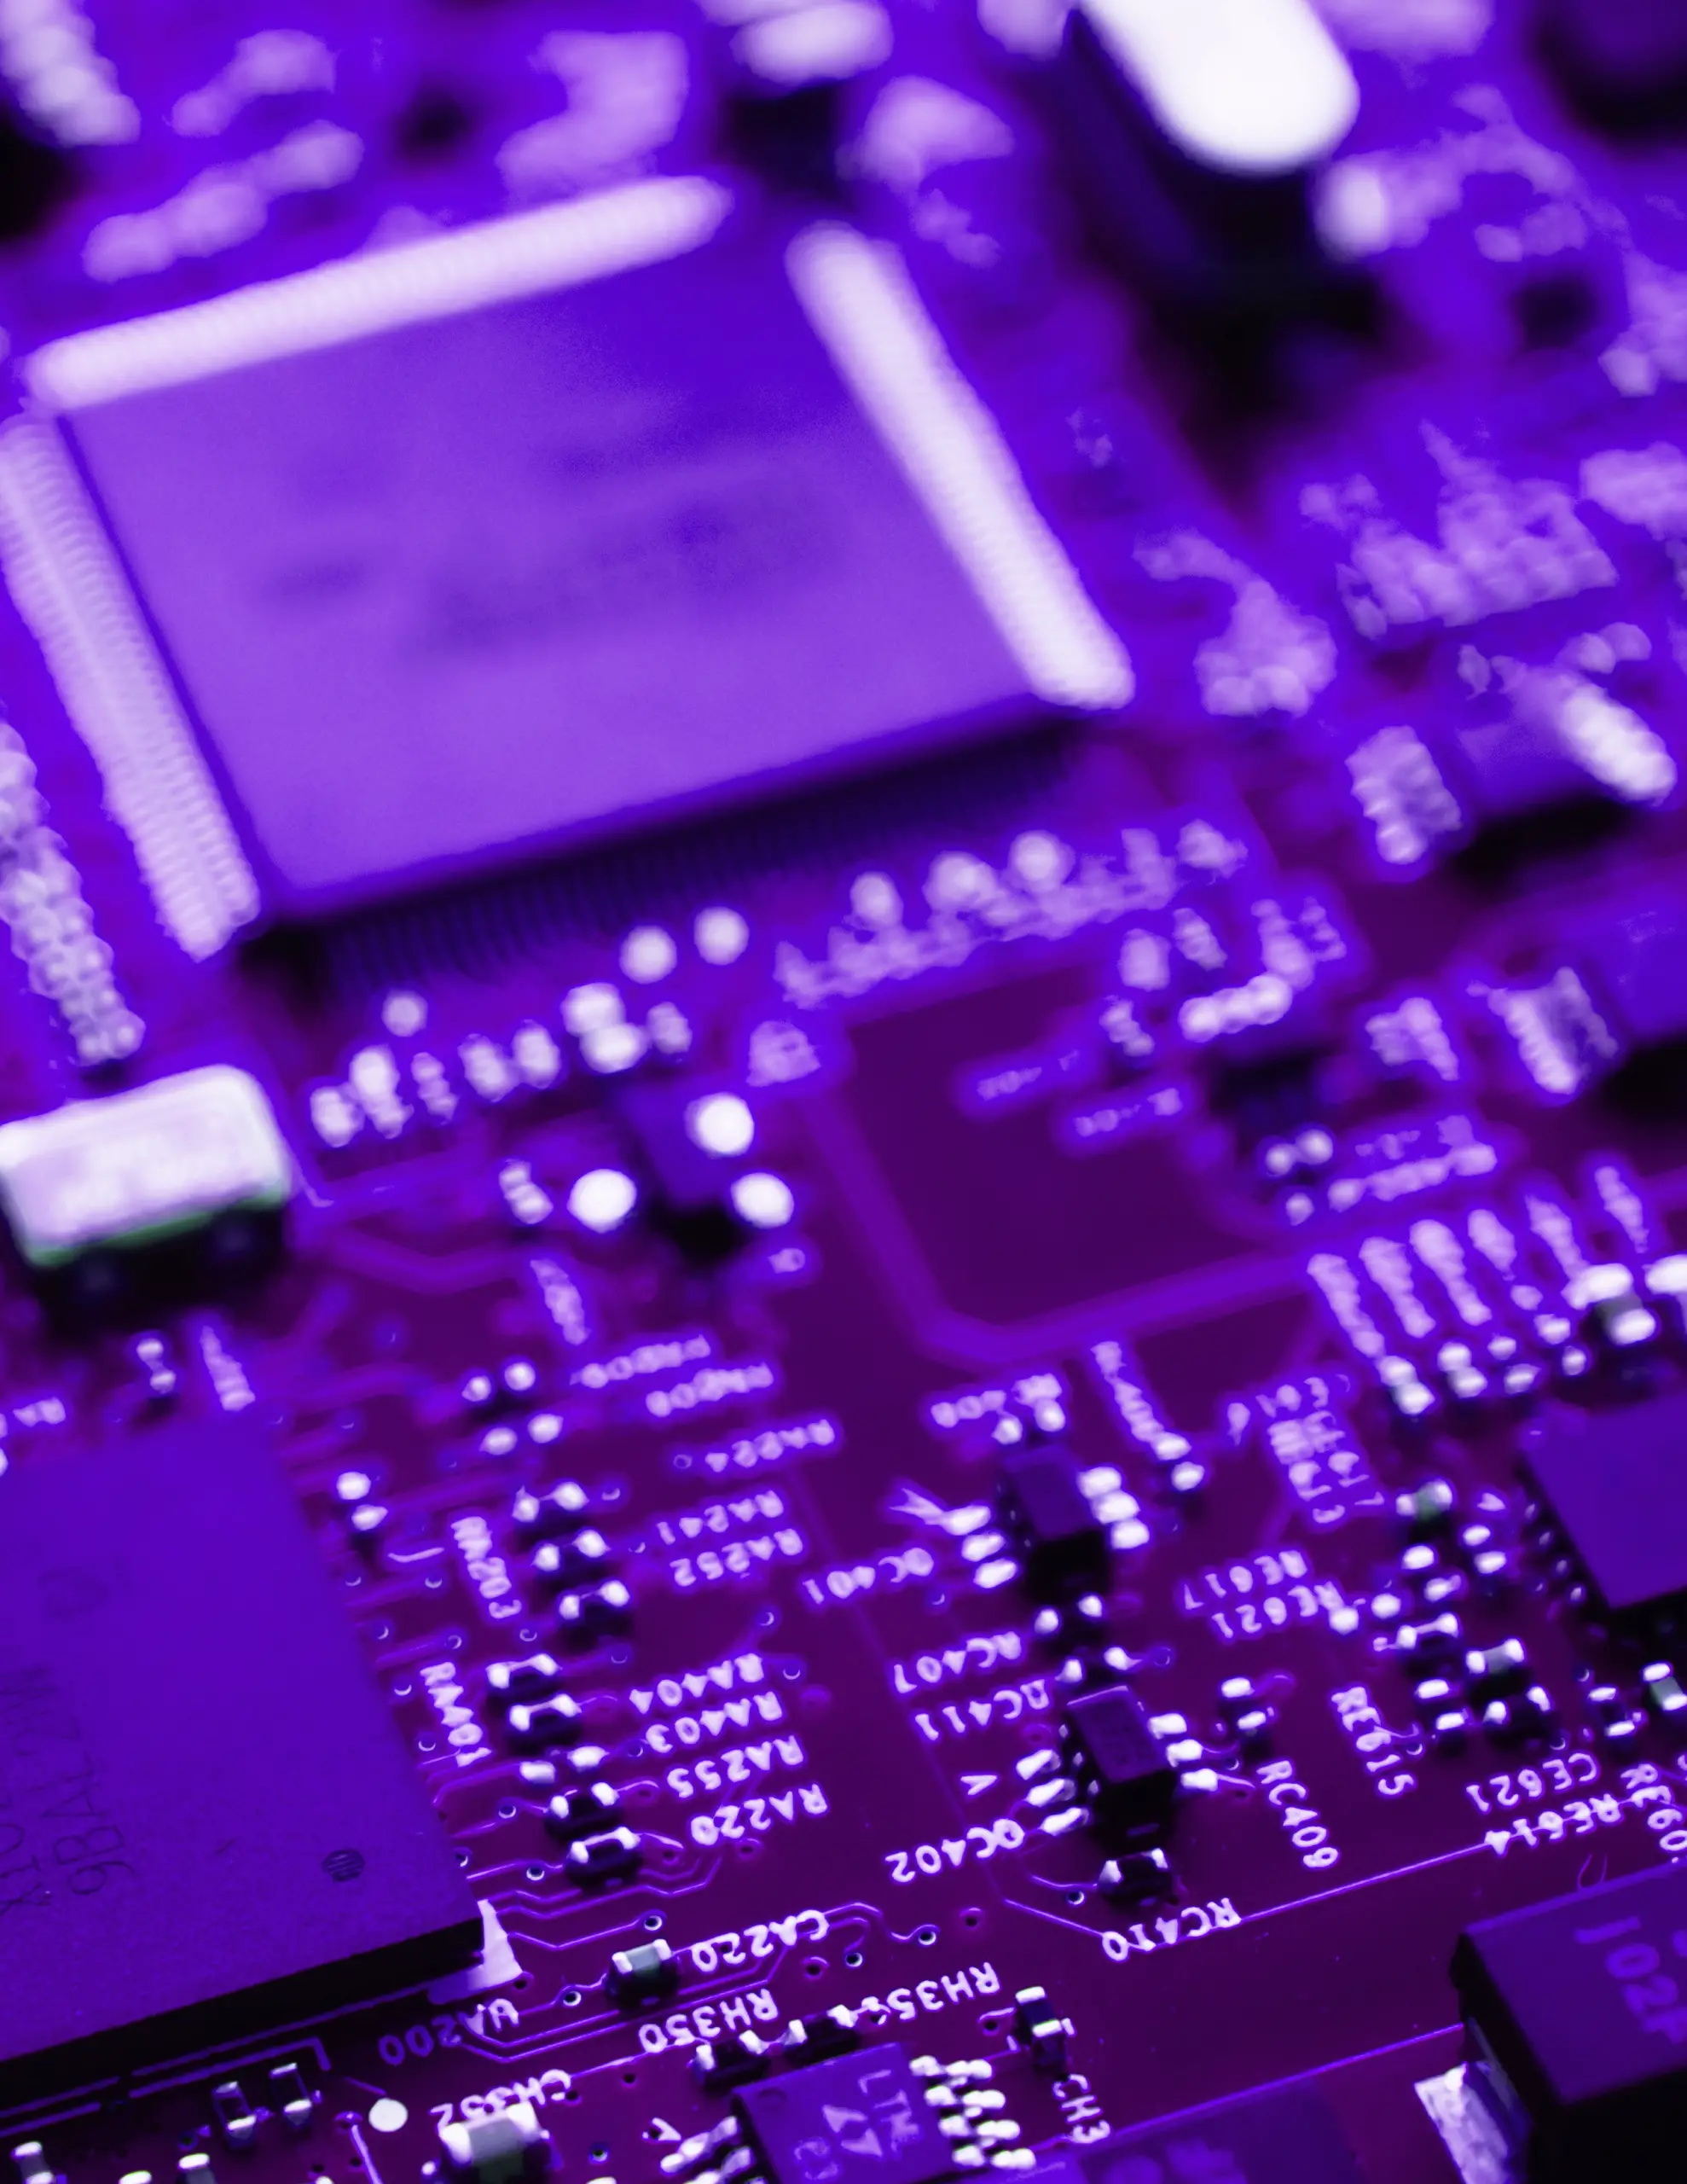 Close-up image of a circuit board illuminated in purple, highlighting various electronic components and microchips.